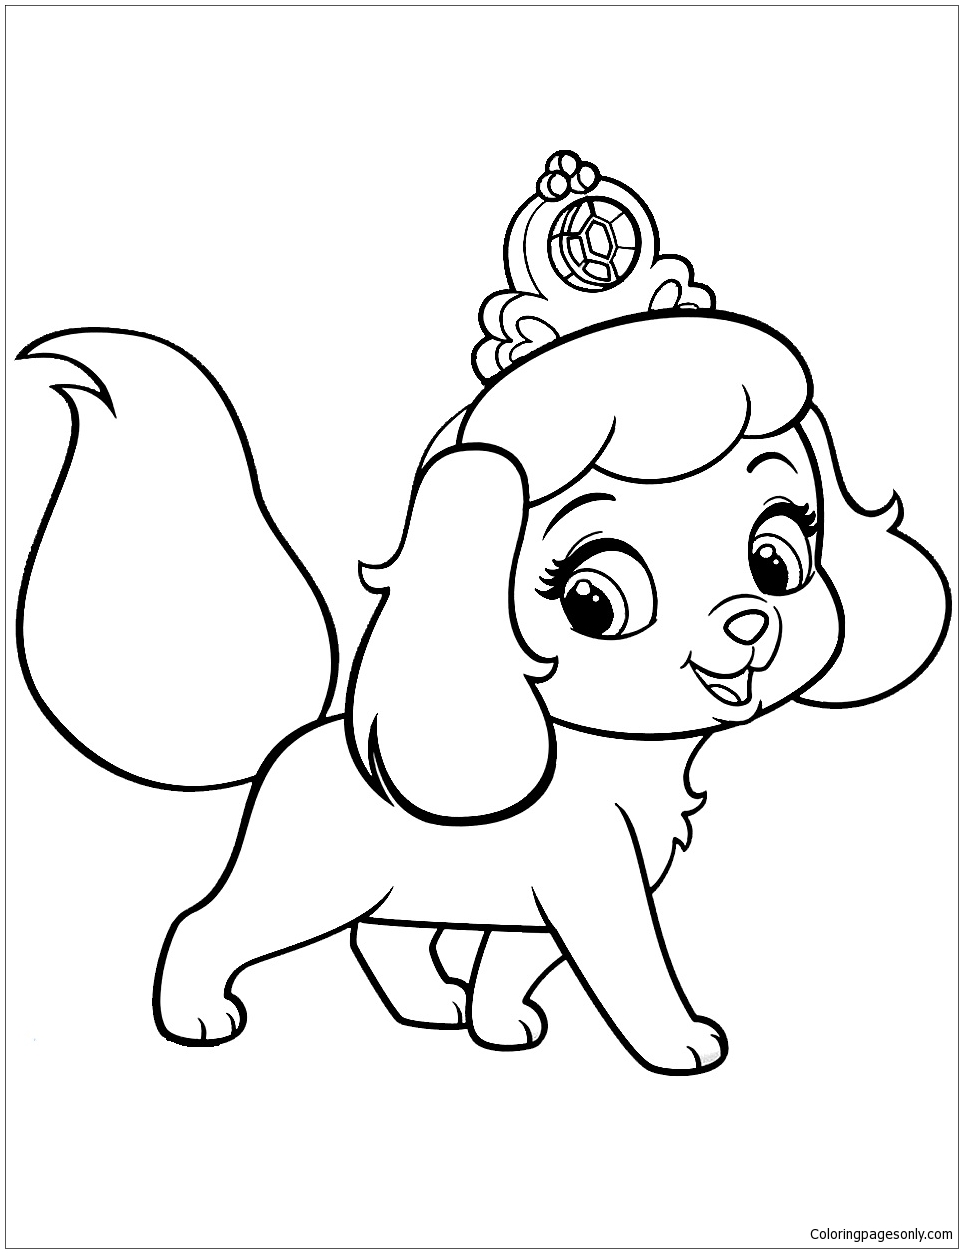 High Tech Puppy Coloring Pages